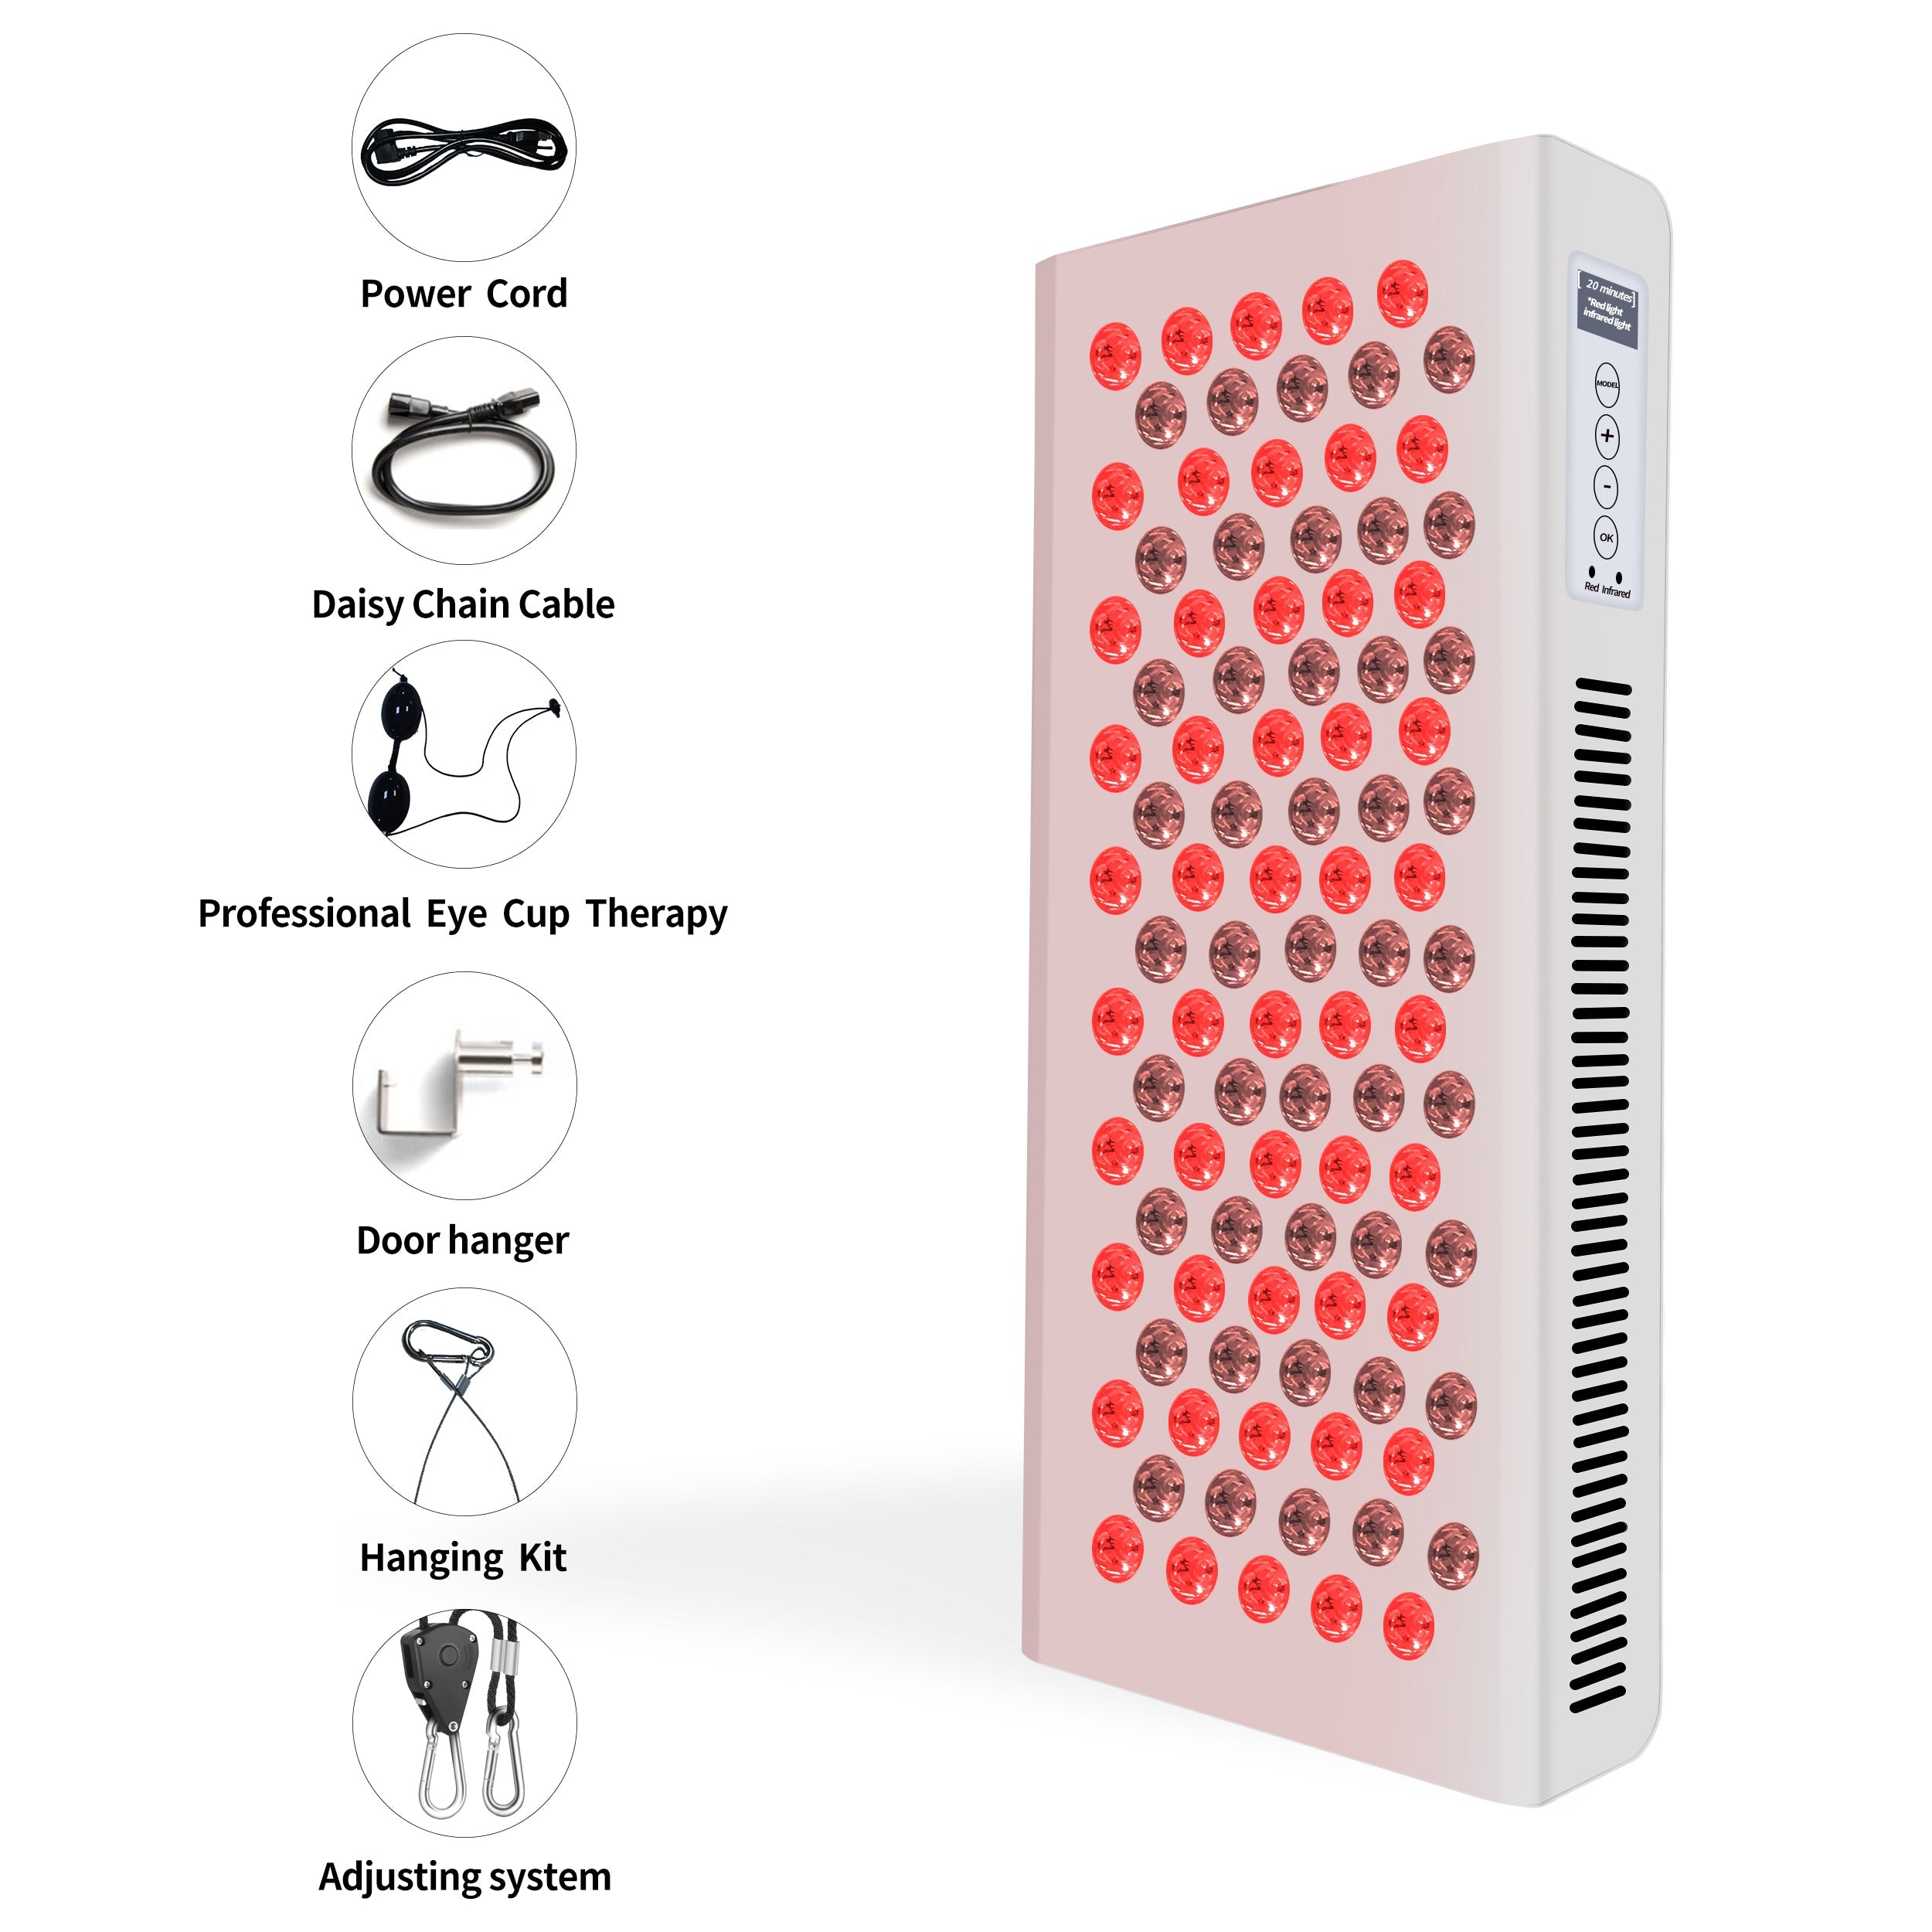 Pro LED Red Light Therapy 1000 SUPER